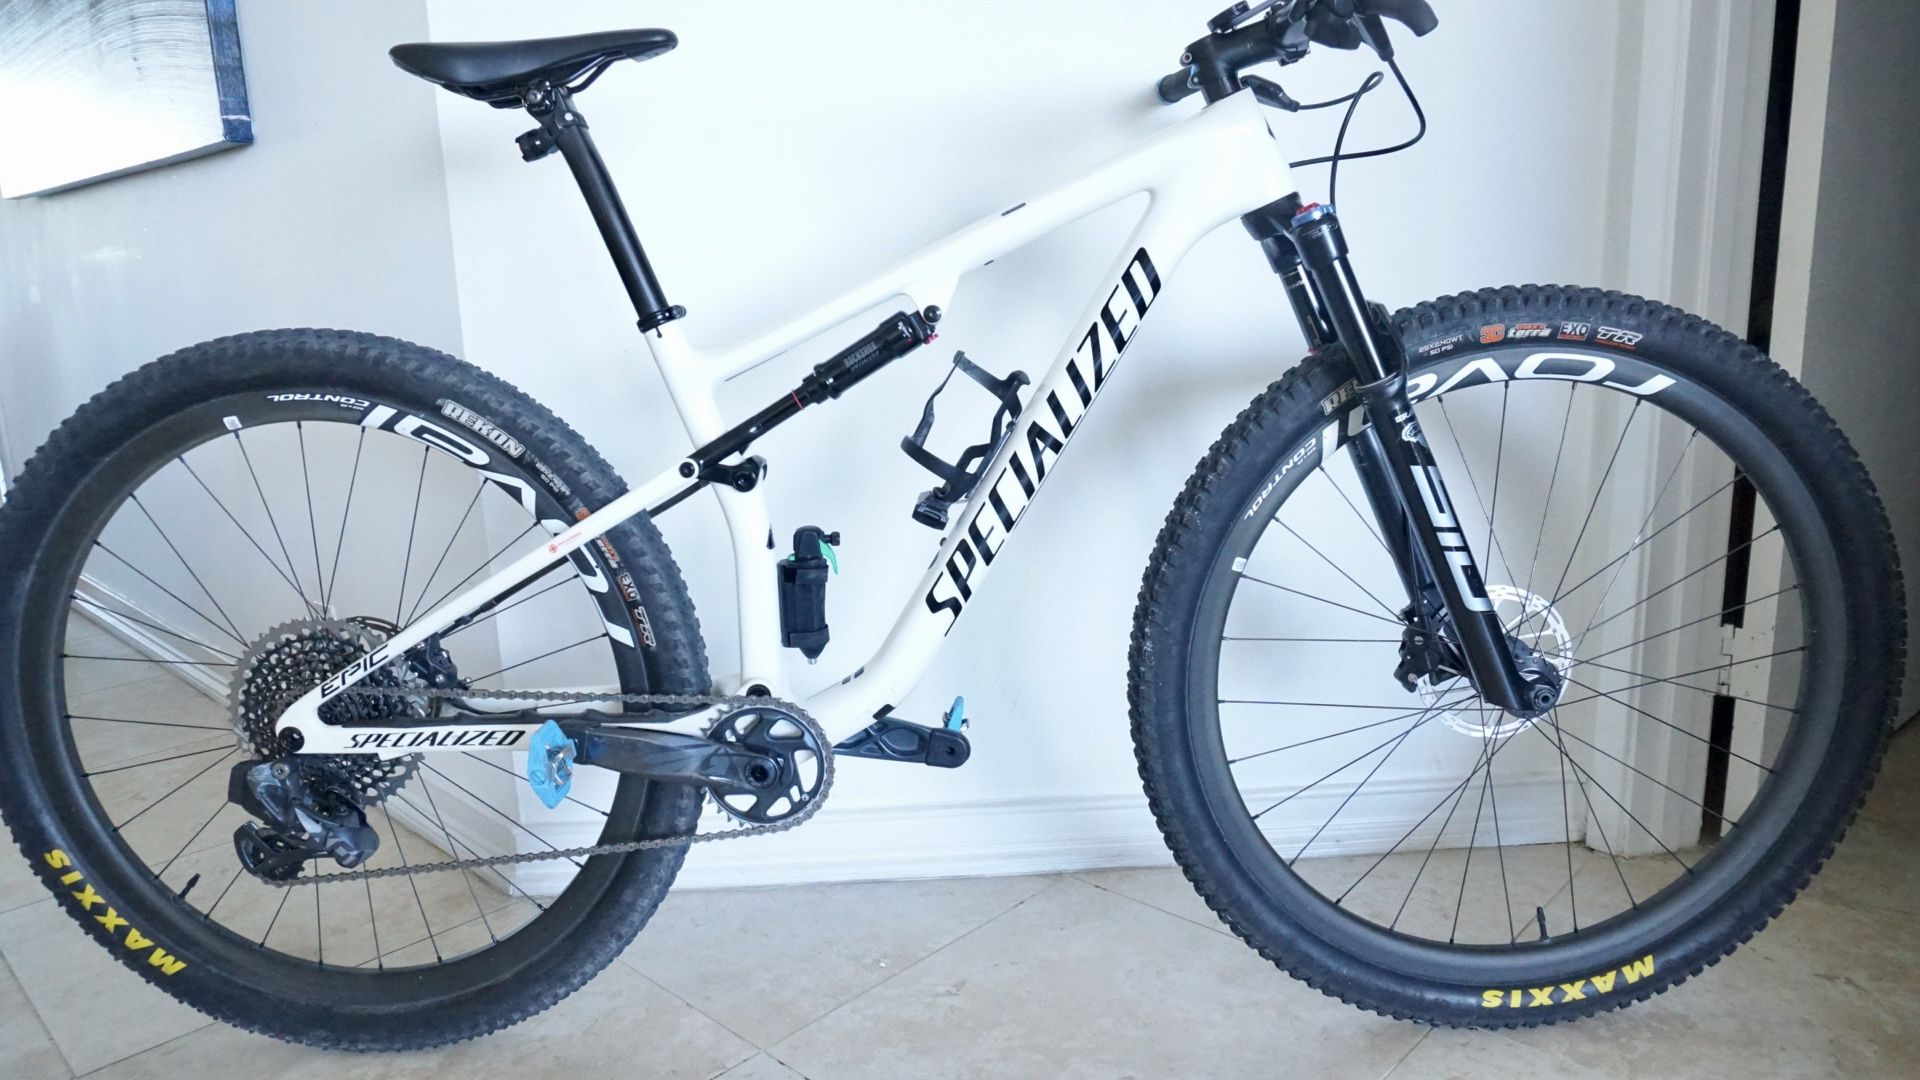 Specialized Epic Pro 